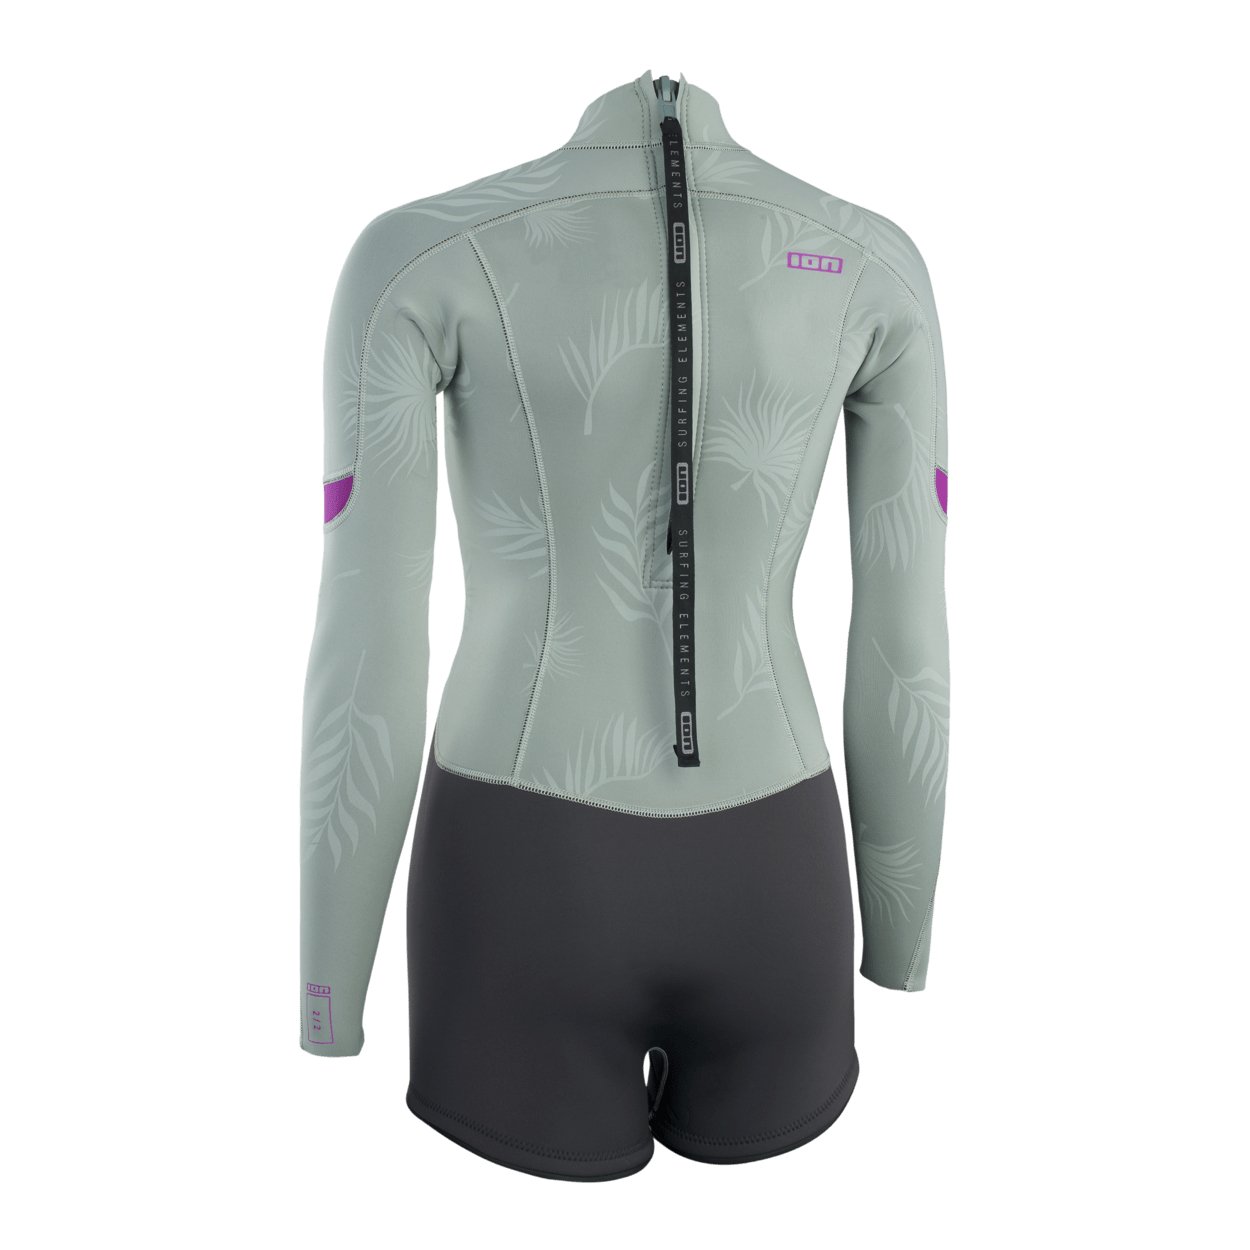 ION Amaze Shorty 2.0 LS Back Zip 2023 - Worthing Watersports - 9010583091075 - Wetsuits - ION Water